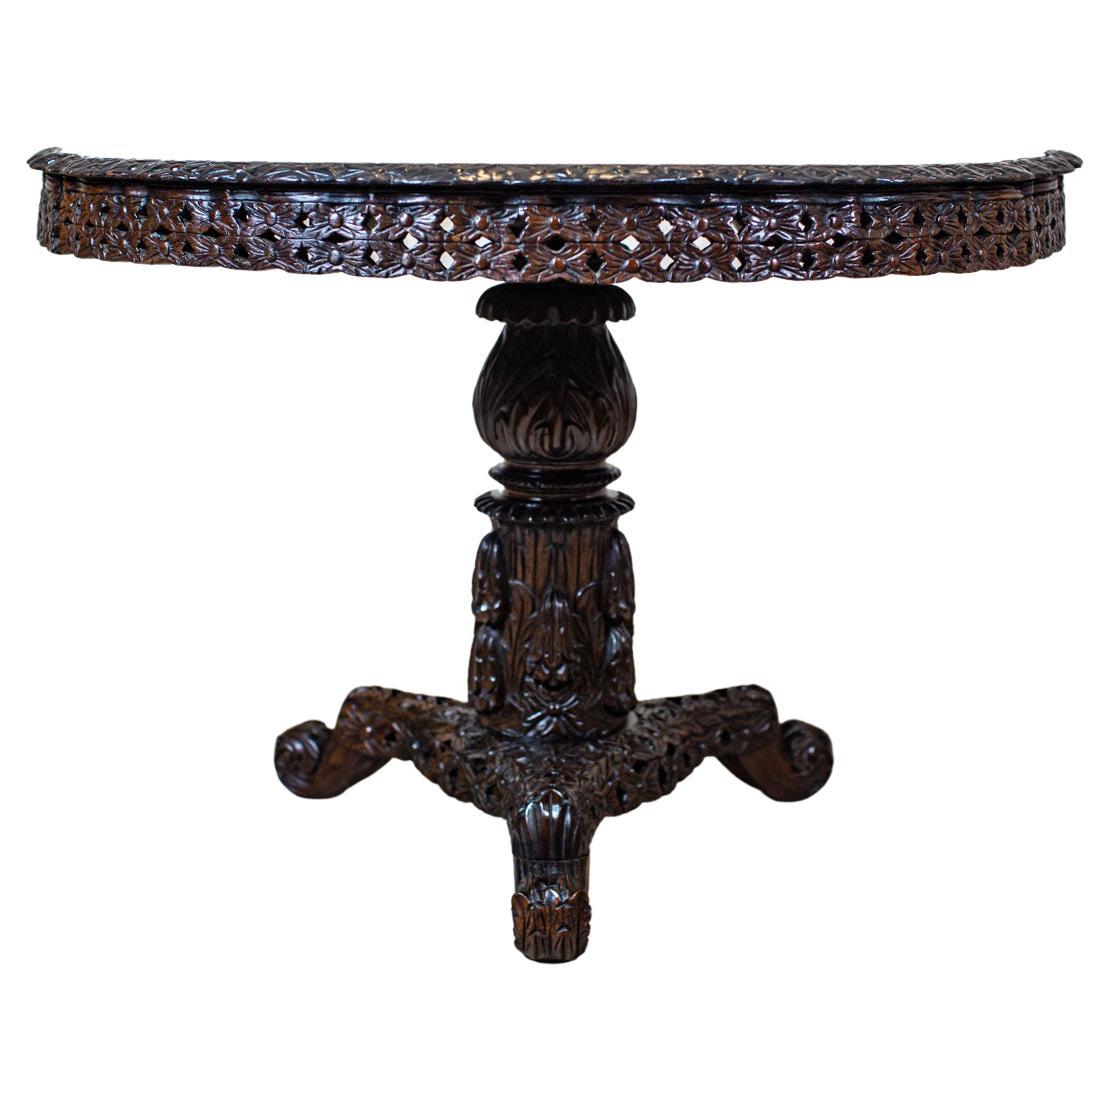 Decorative Rosewood Table from the Turn of the 19th and 20th Centuries

We present you a rosewood oval table with a top finished with openwork carved patterns. The whole table is supported on a pedestal with three feet.

Presented piece of furniture